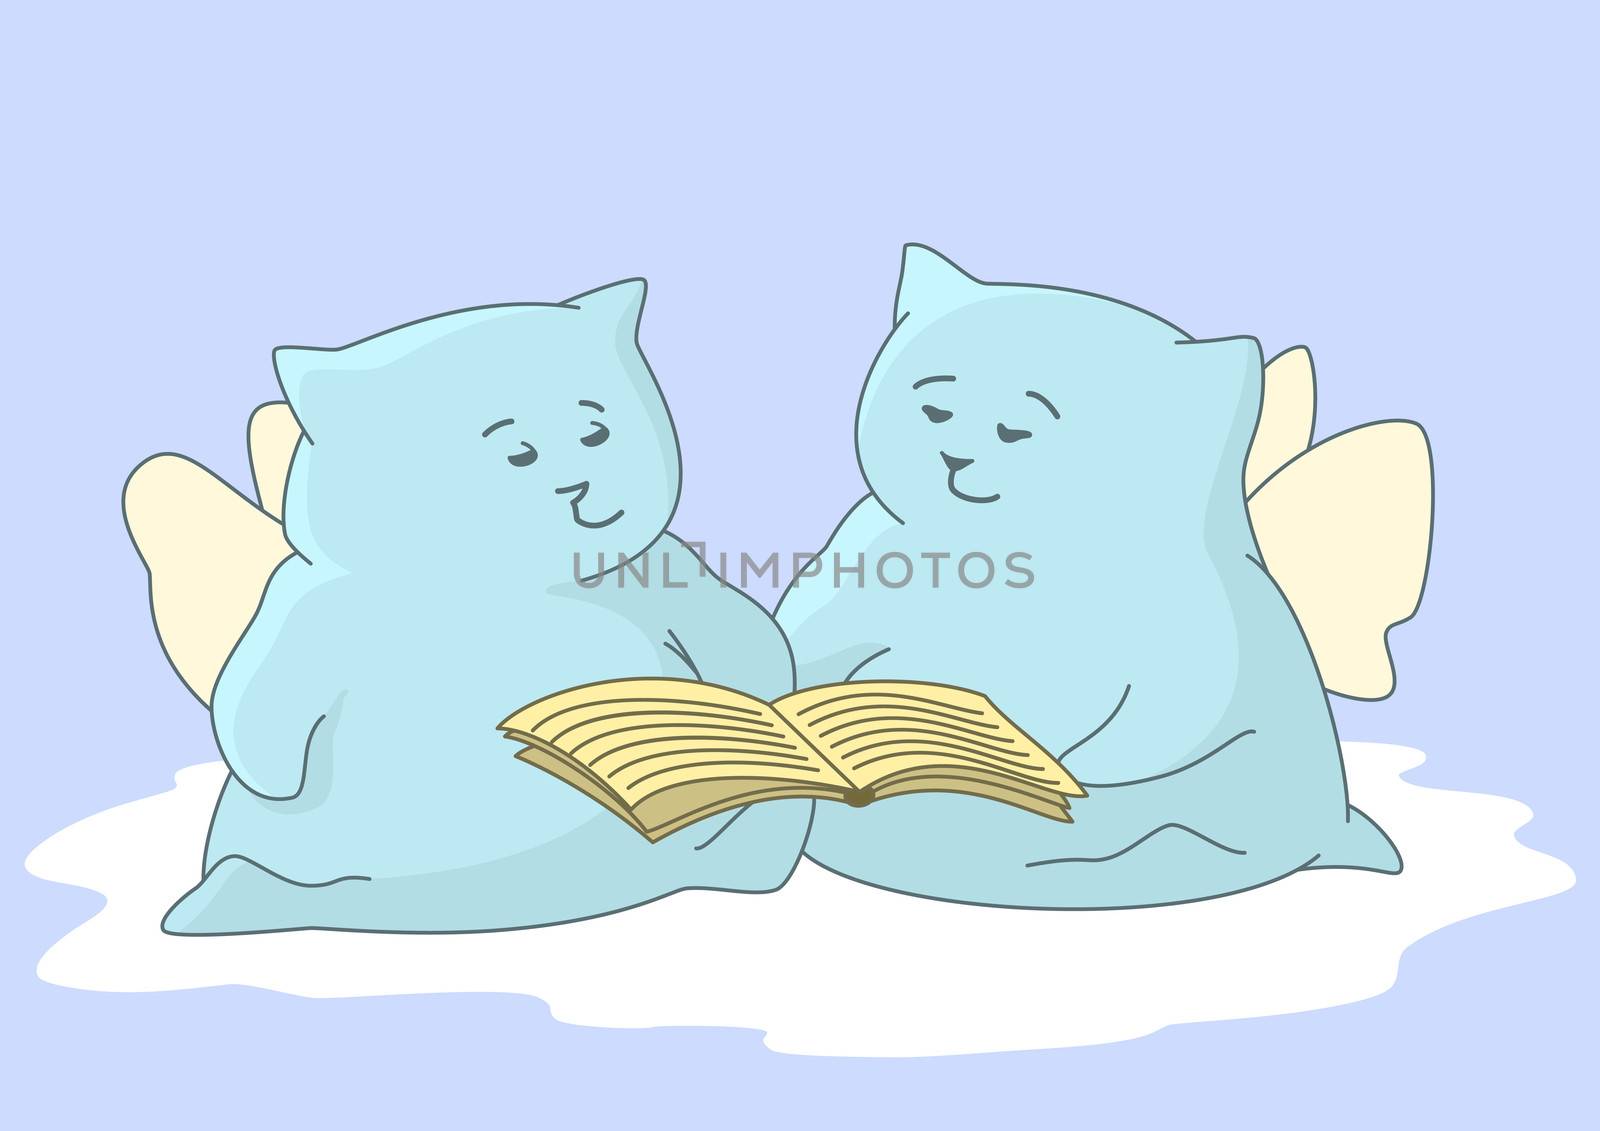 Angels-pillows with the book by alexcoolok